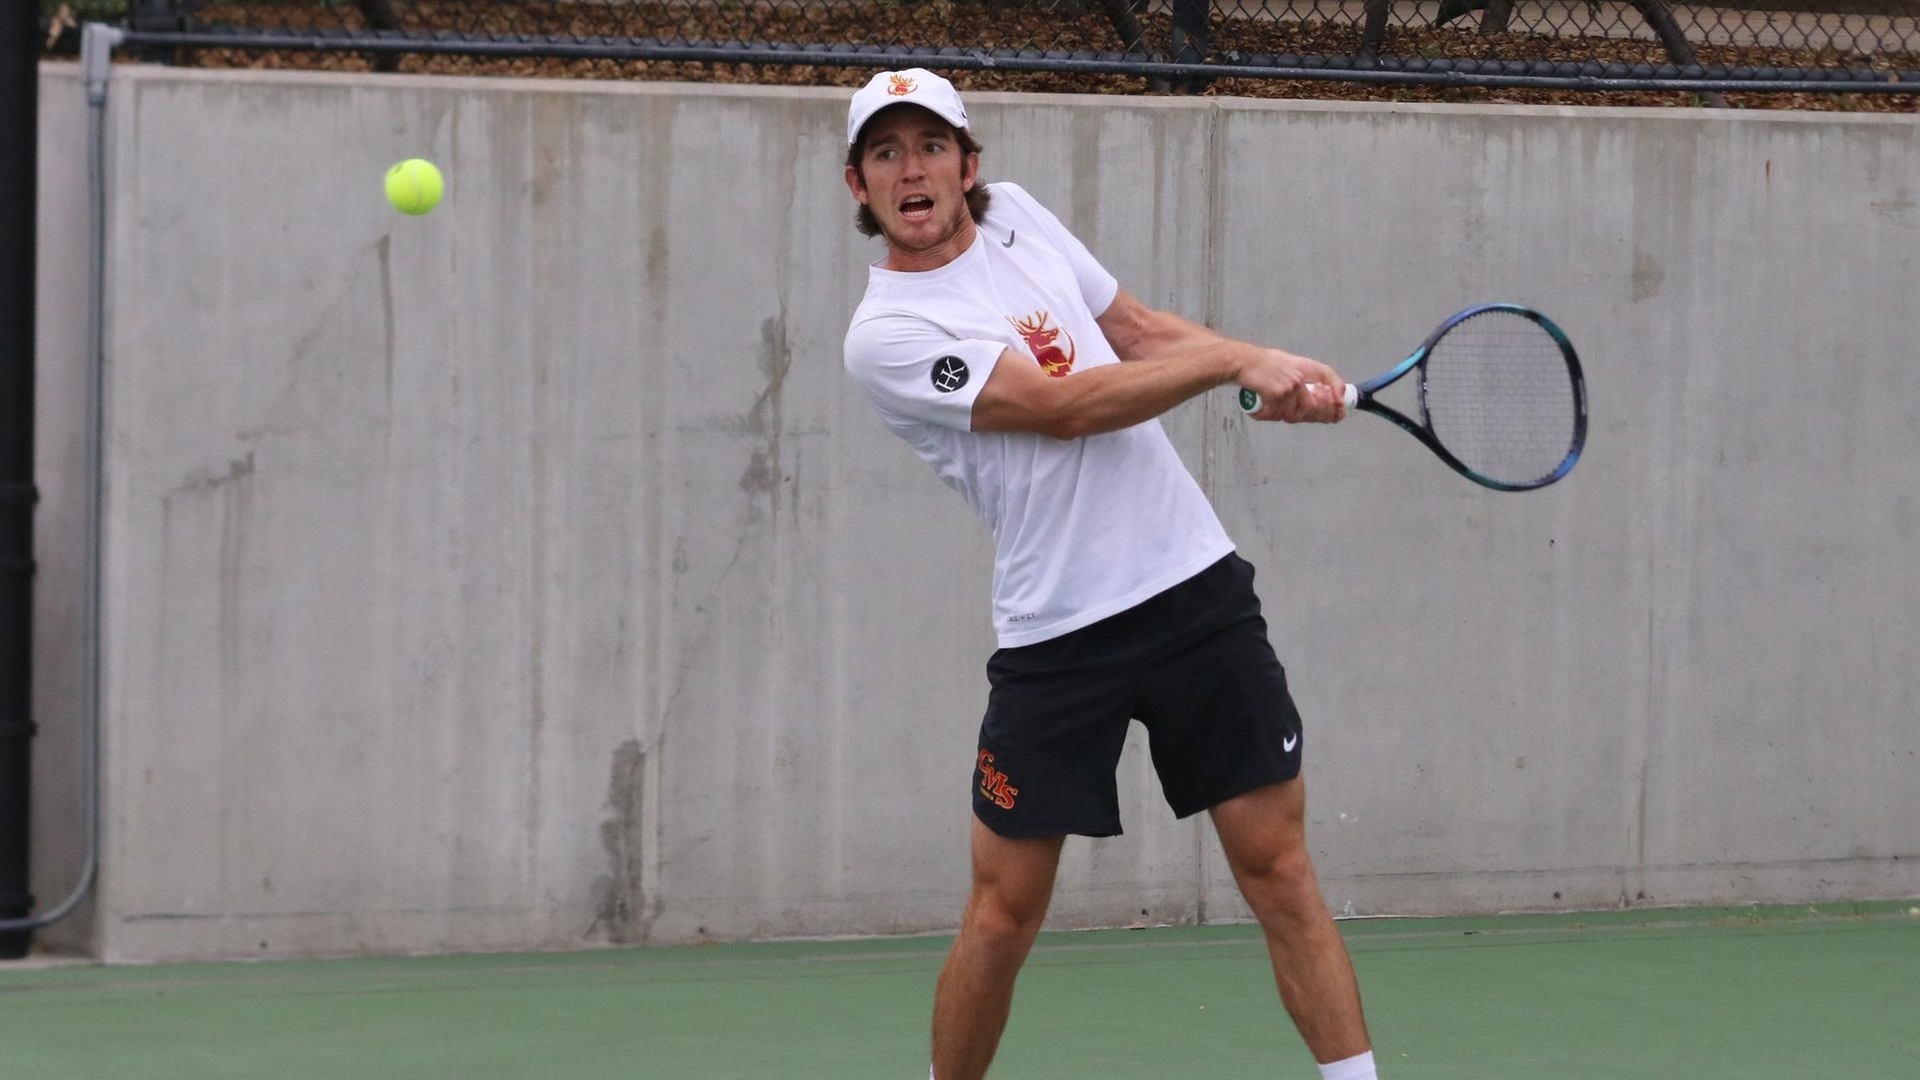 Ian Freer had the clinch in both matches, including 4-6, 6-3, 6-2 vs. Westcliff